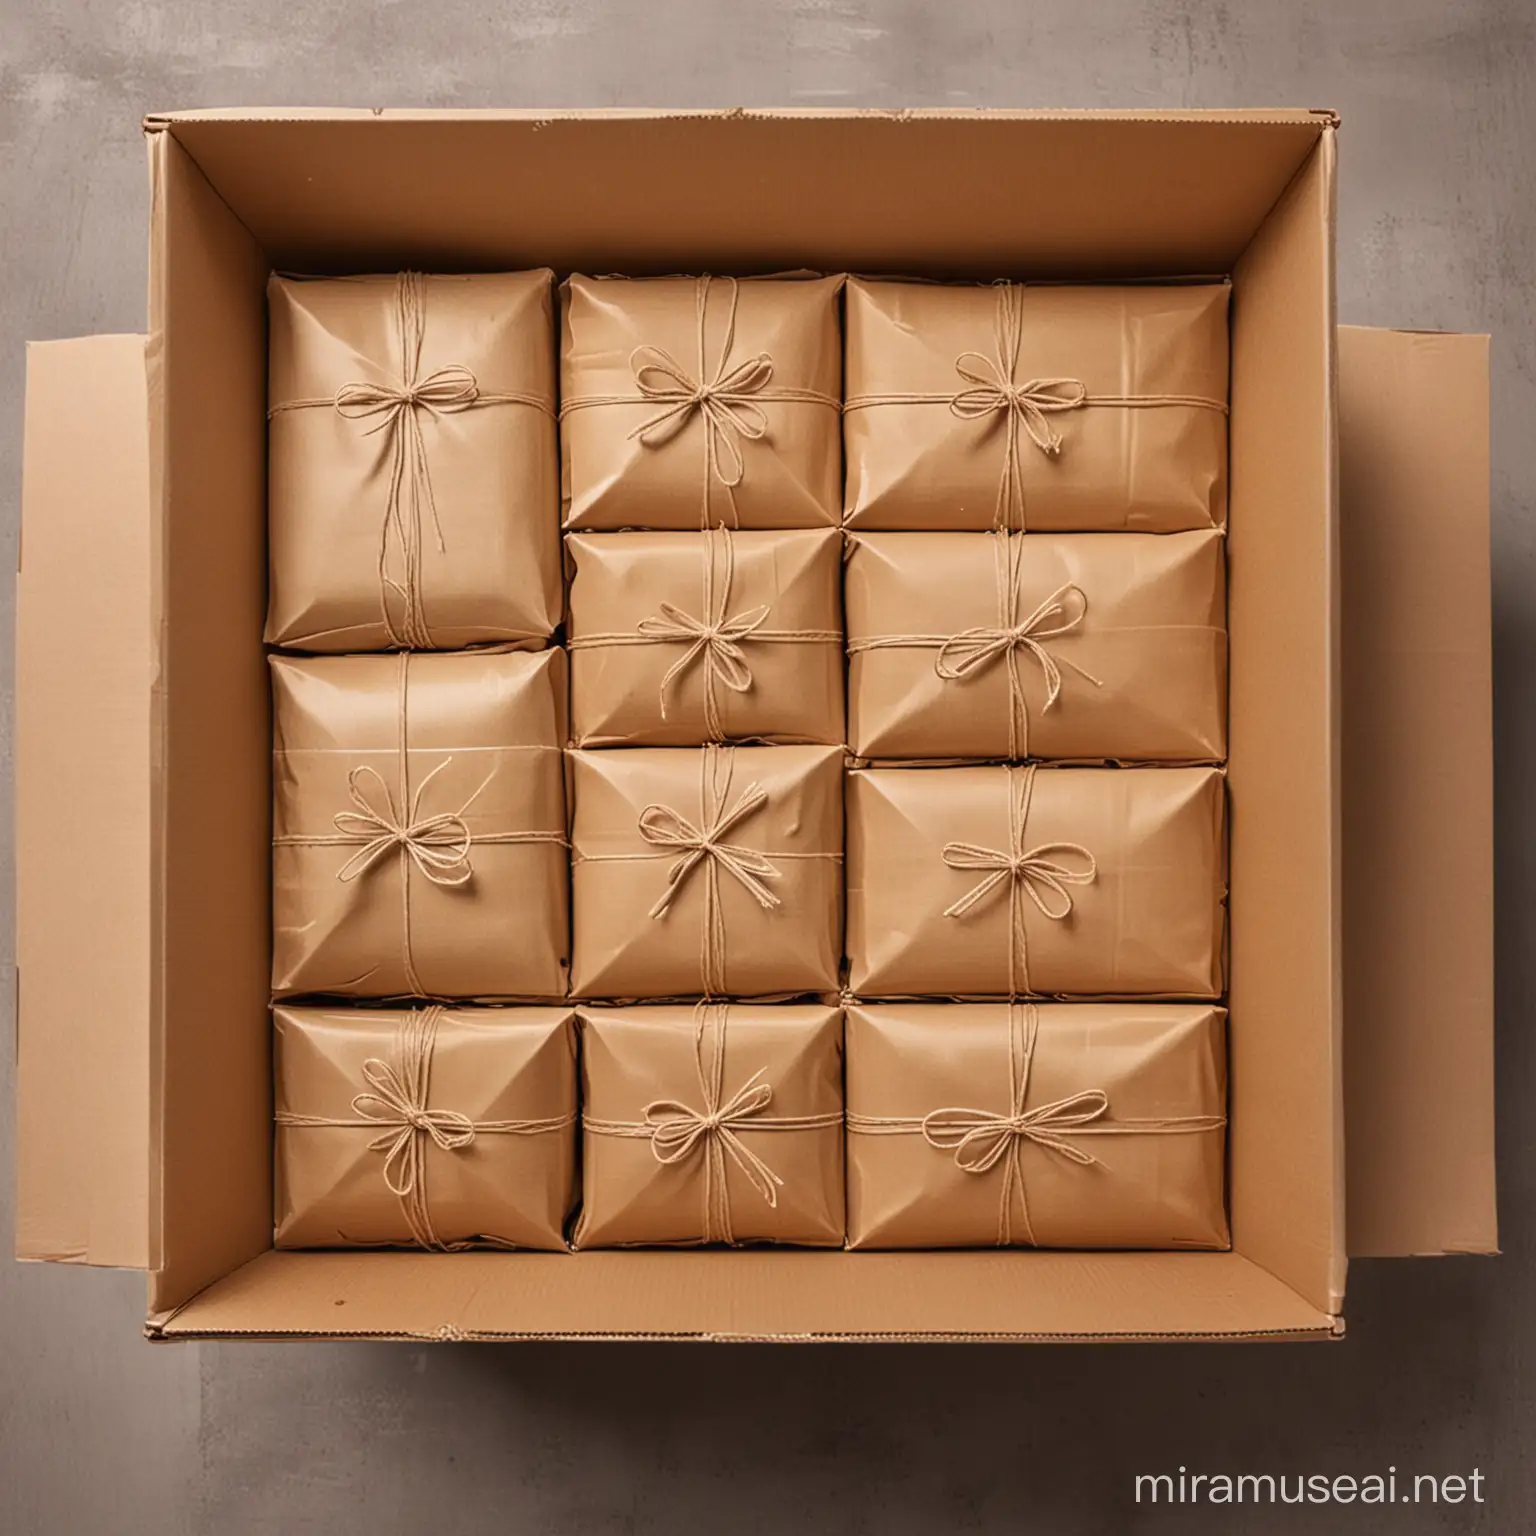 A picture of smaller parcels being arranged in a bigger carton full view
